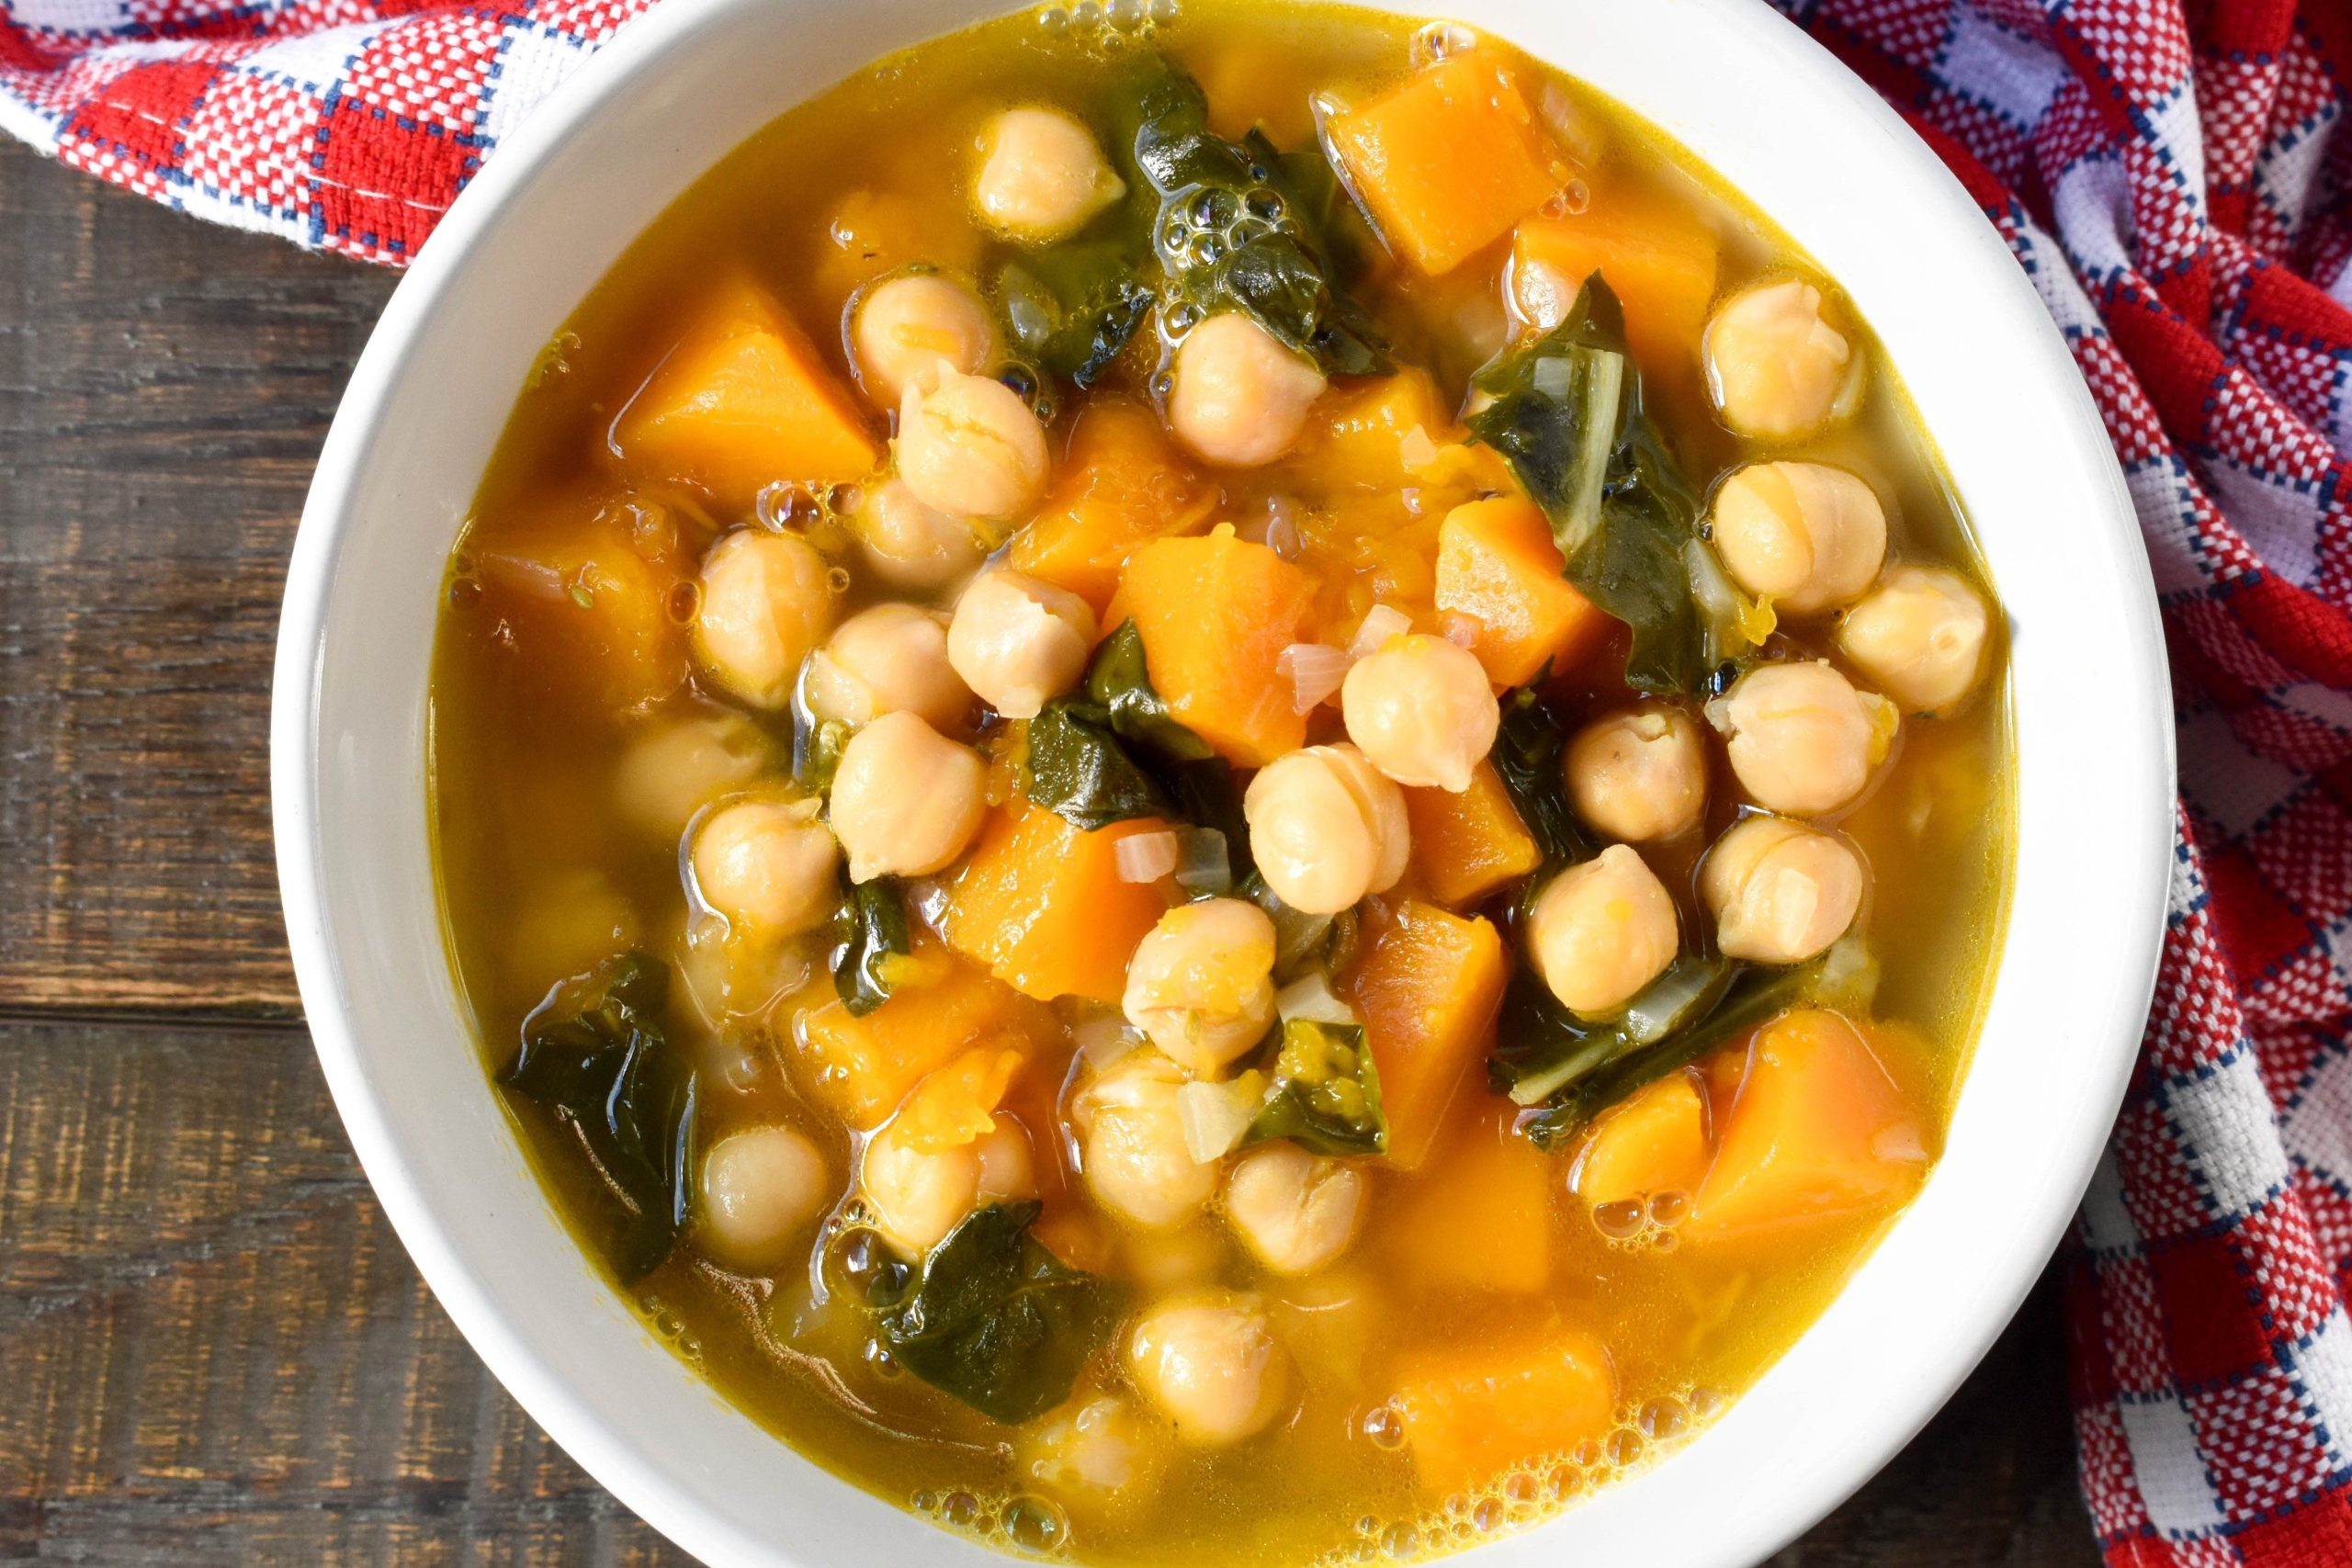 Cozy up with our hearty chickpea soup recipe